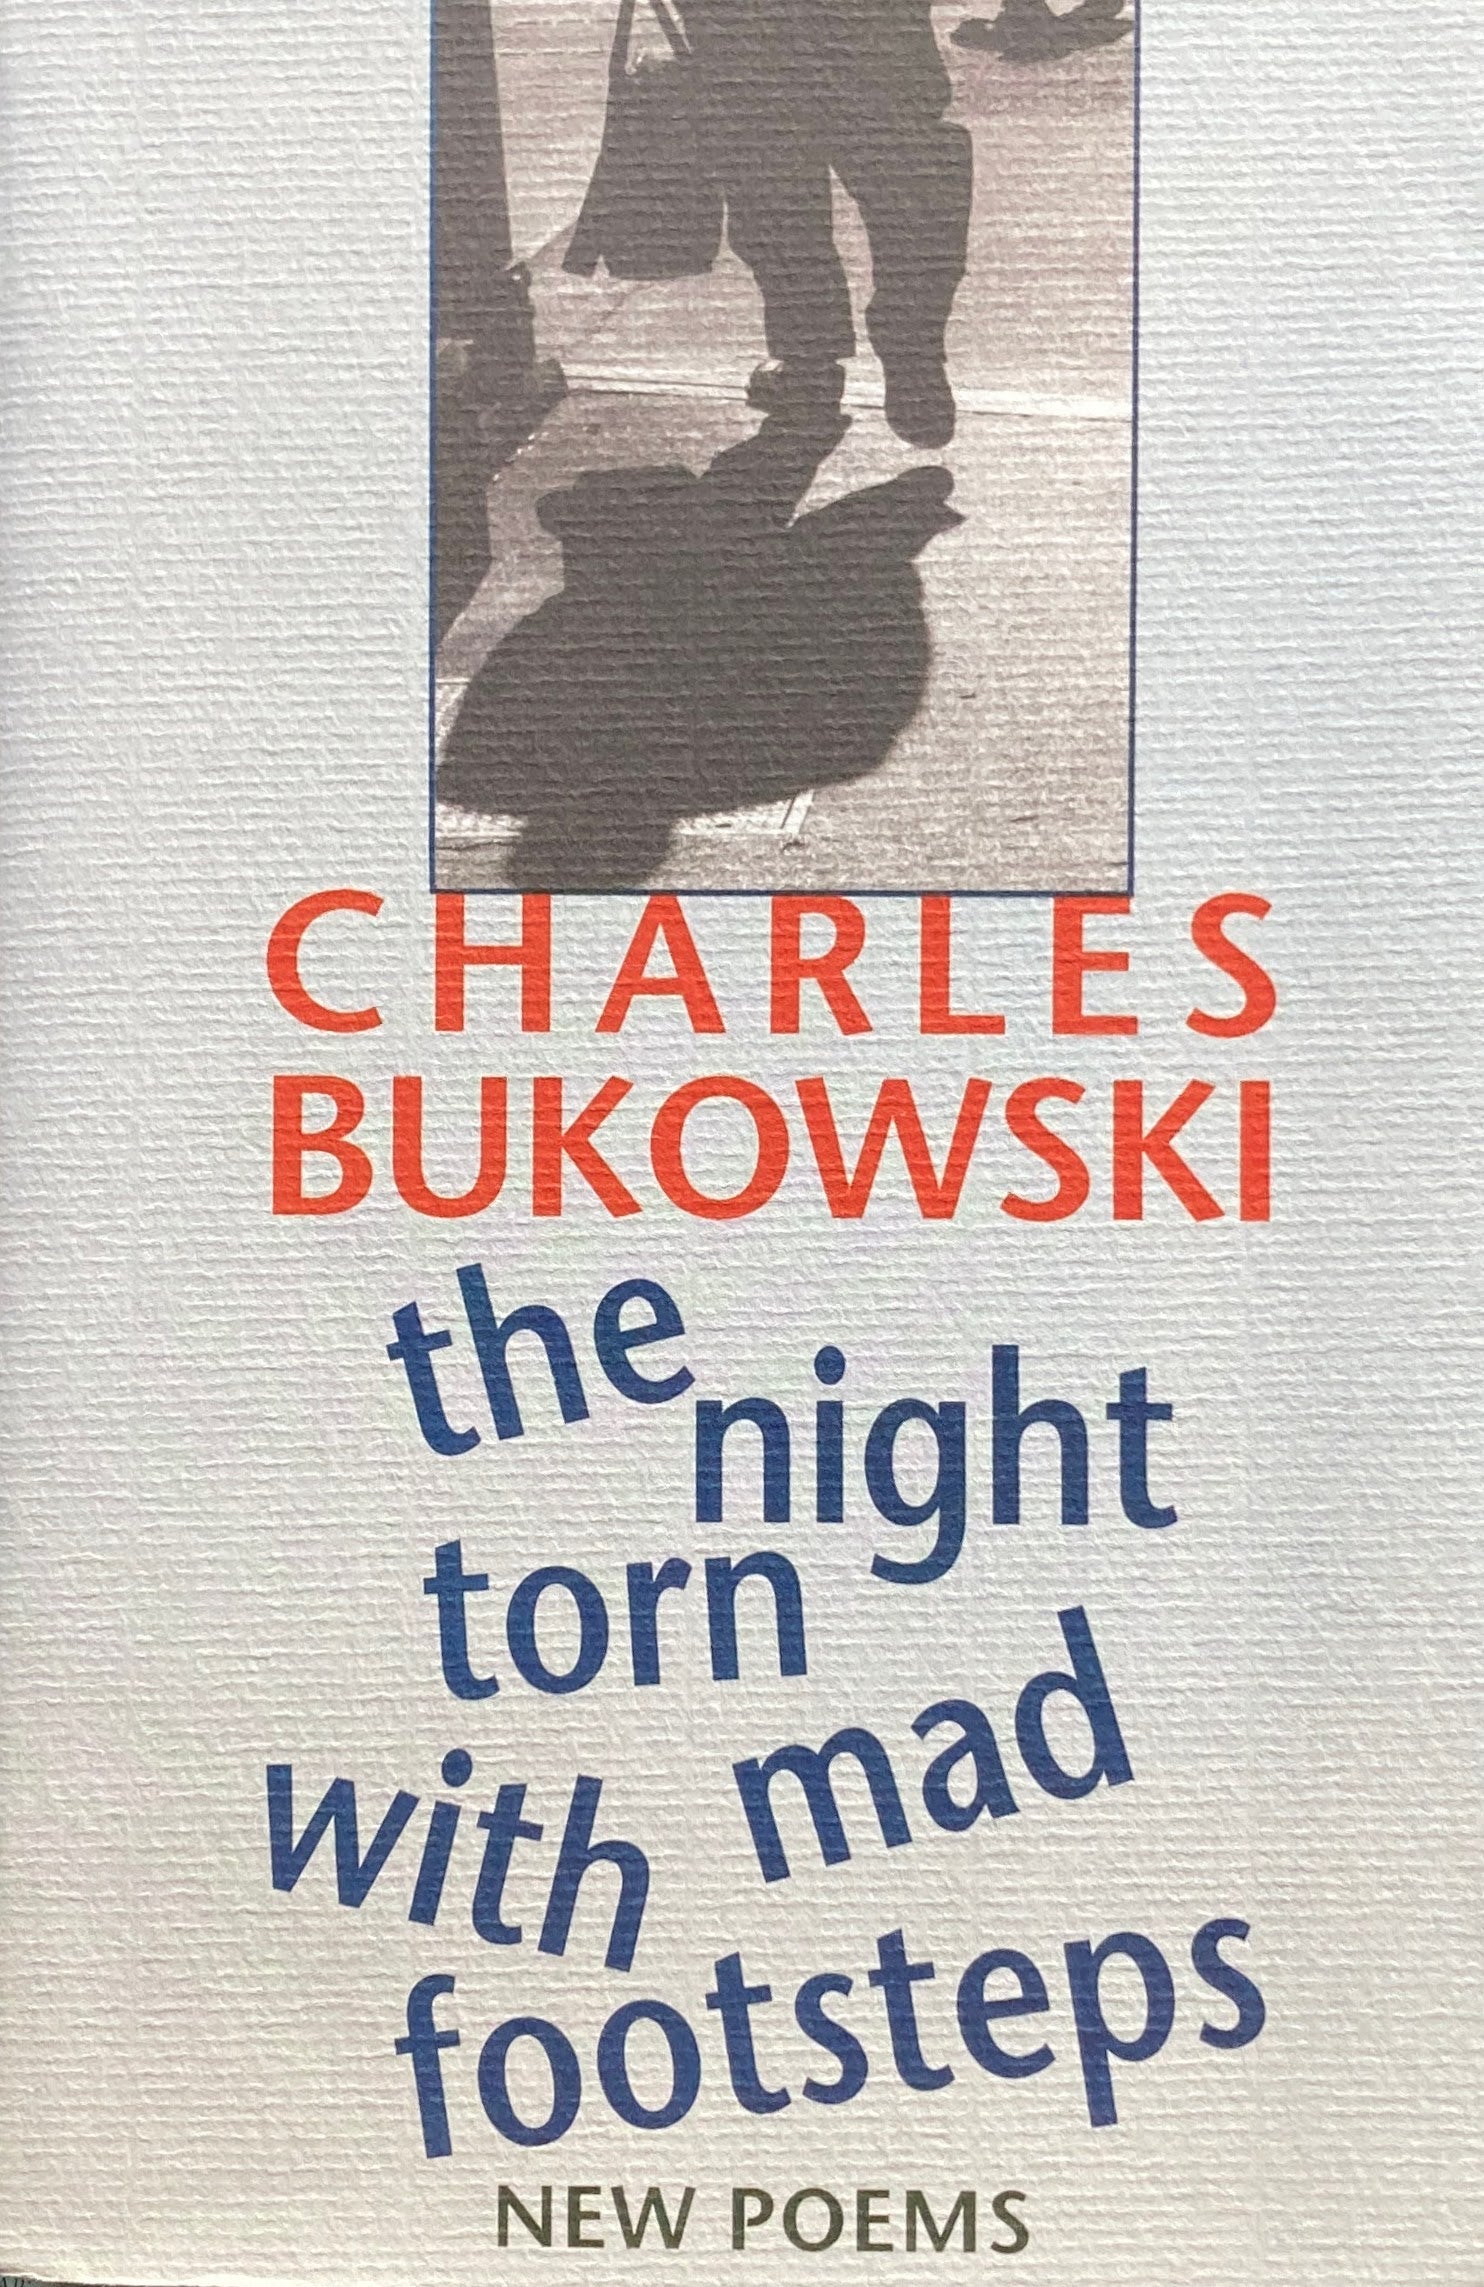 The Night Torn Mad With Footsteps　New Poems 　Charles Bukowski 　チャールズ・ブコウスキー